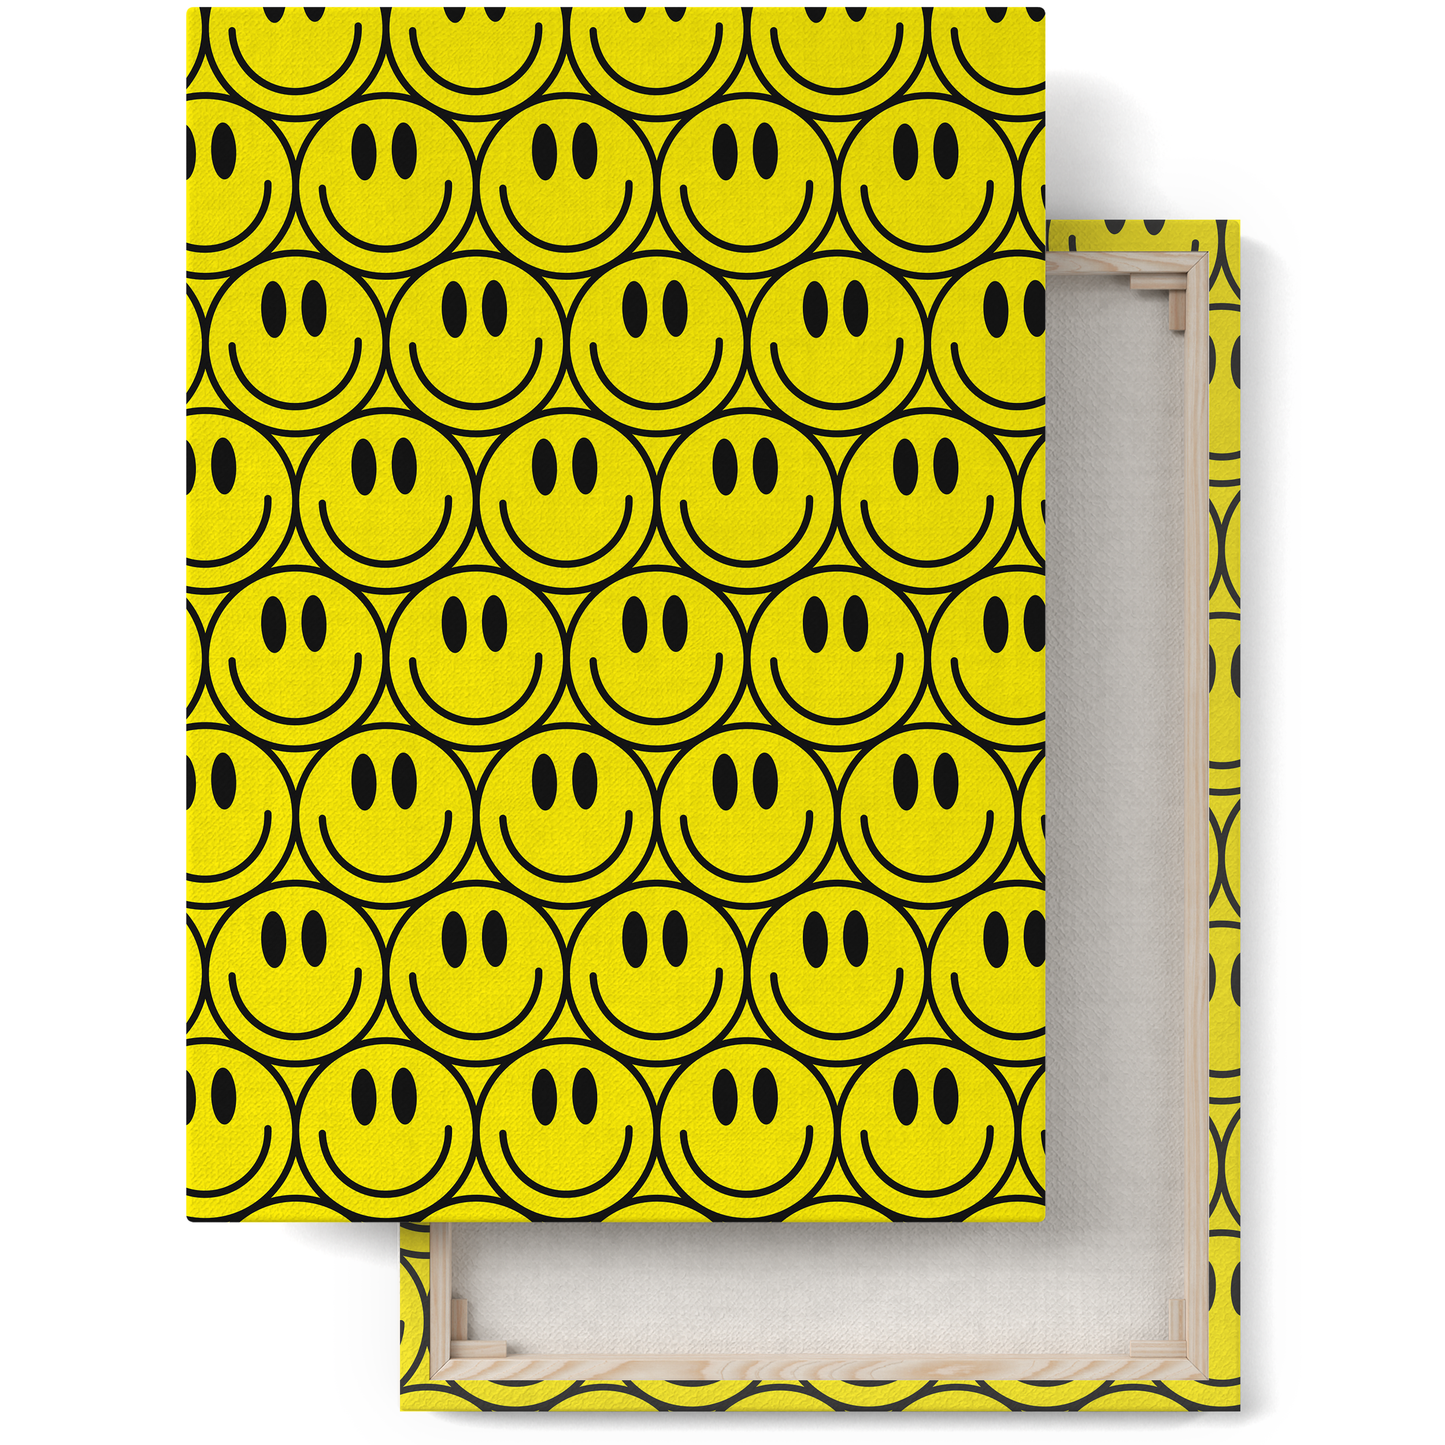 Yellow Psychodelic Smiling Faces Canvas Print